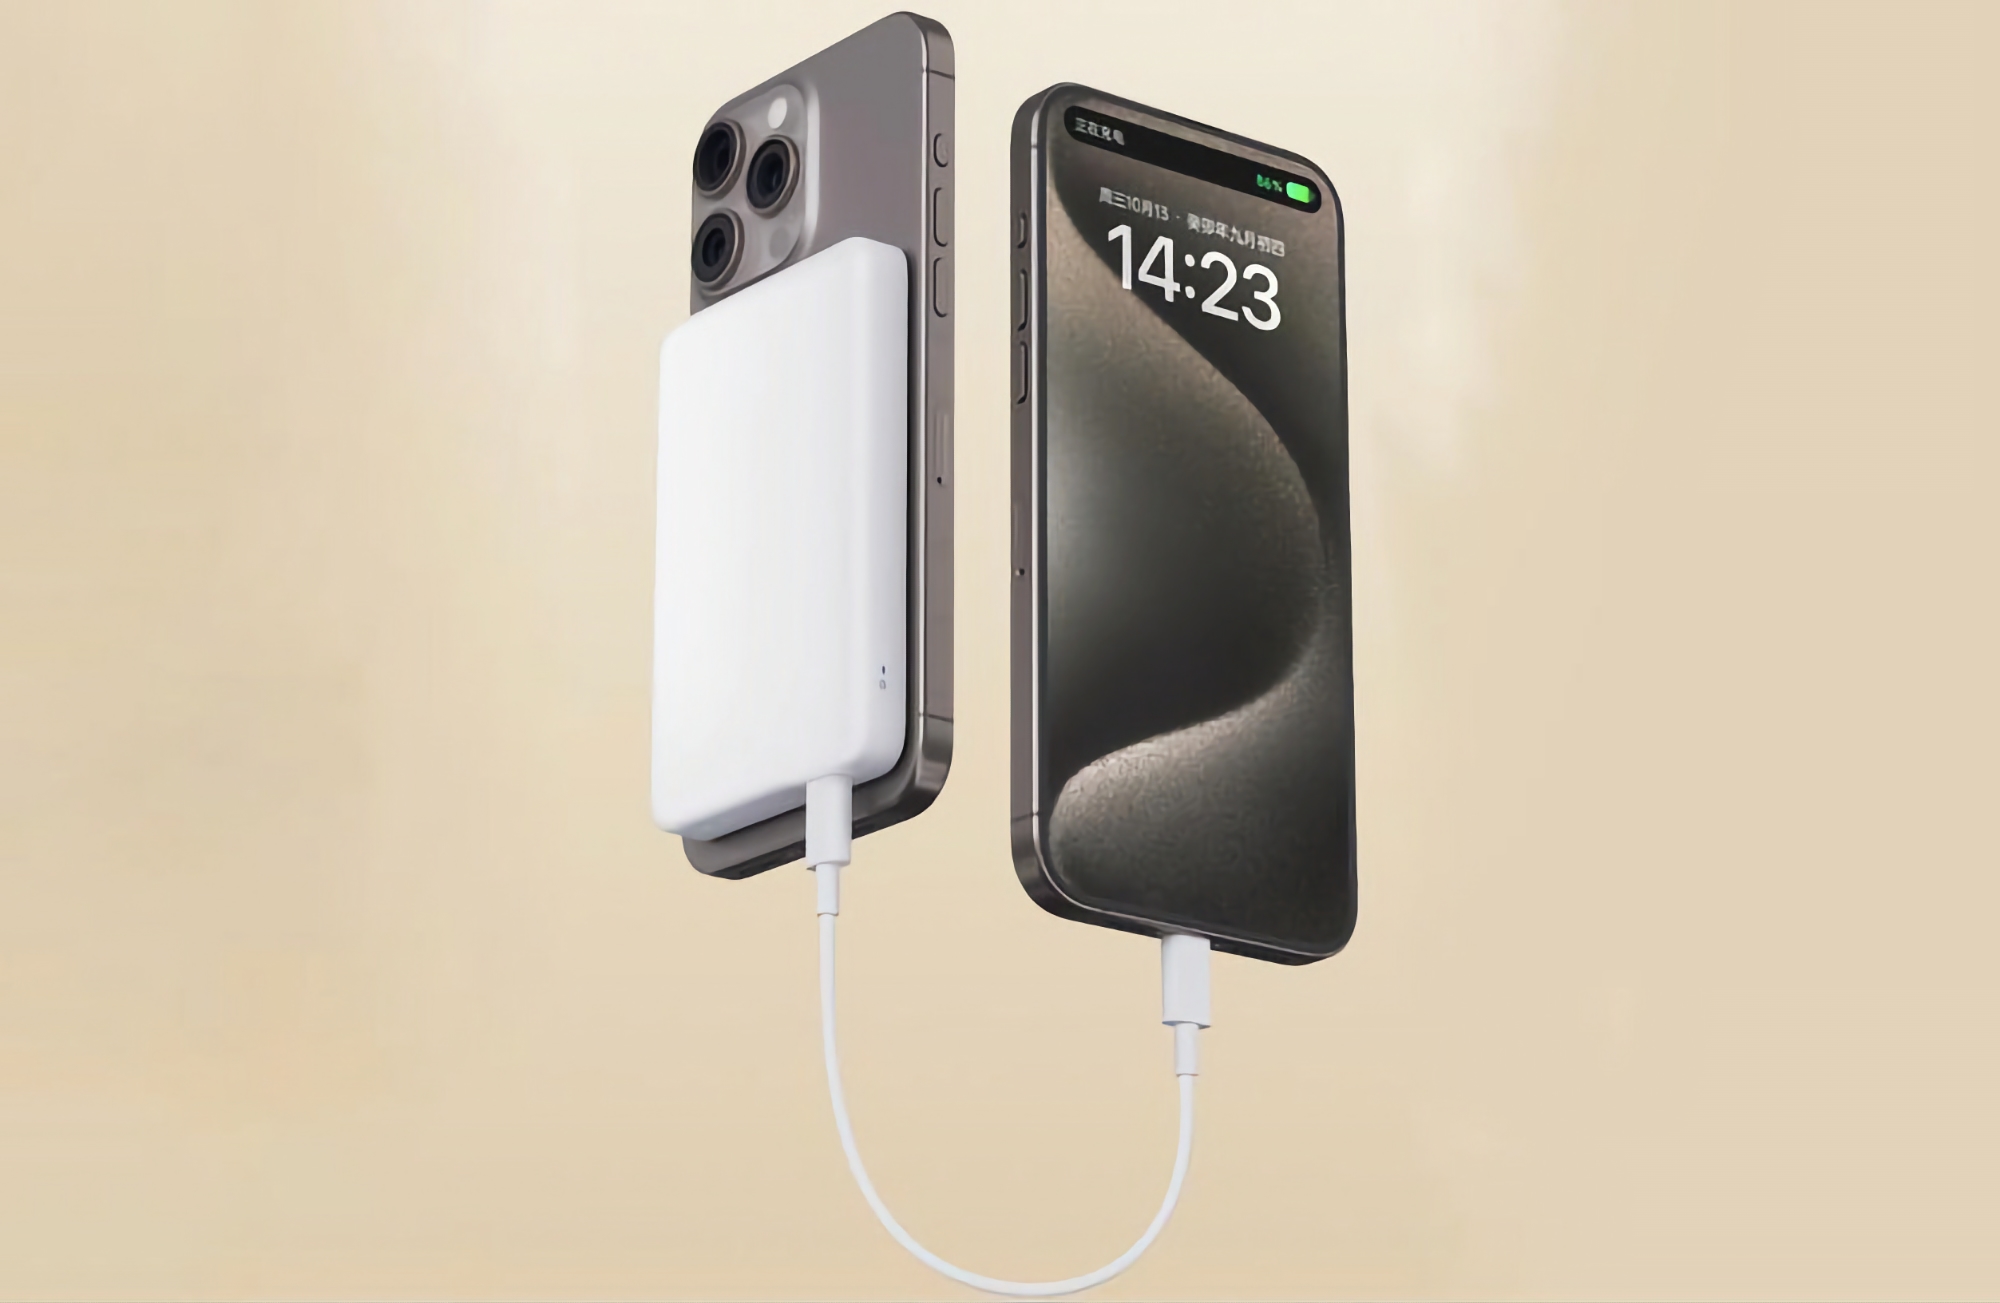 Xiaomi has started selling Magnetic Power Bank for iPhone with MagSafe support, 5000 mAh capacity and $18 price tag